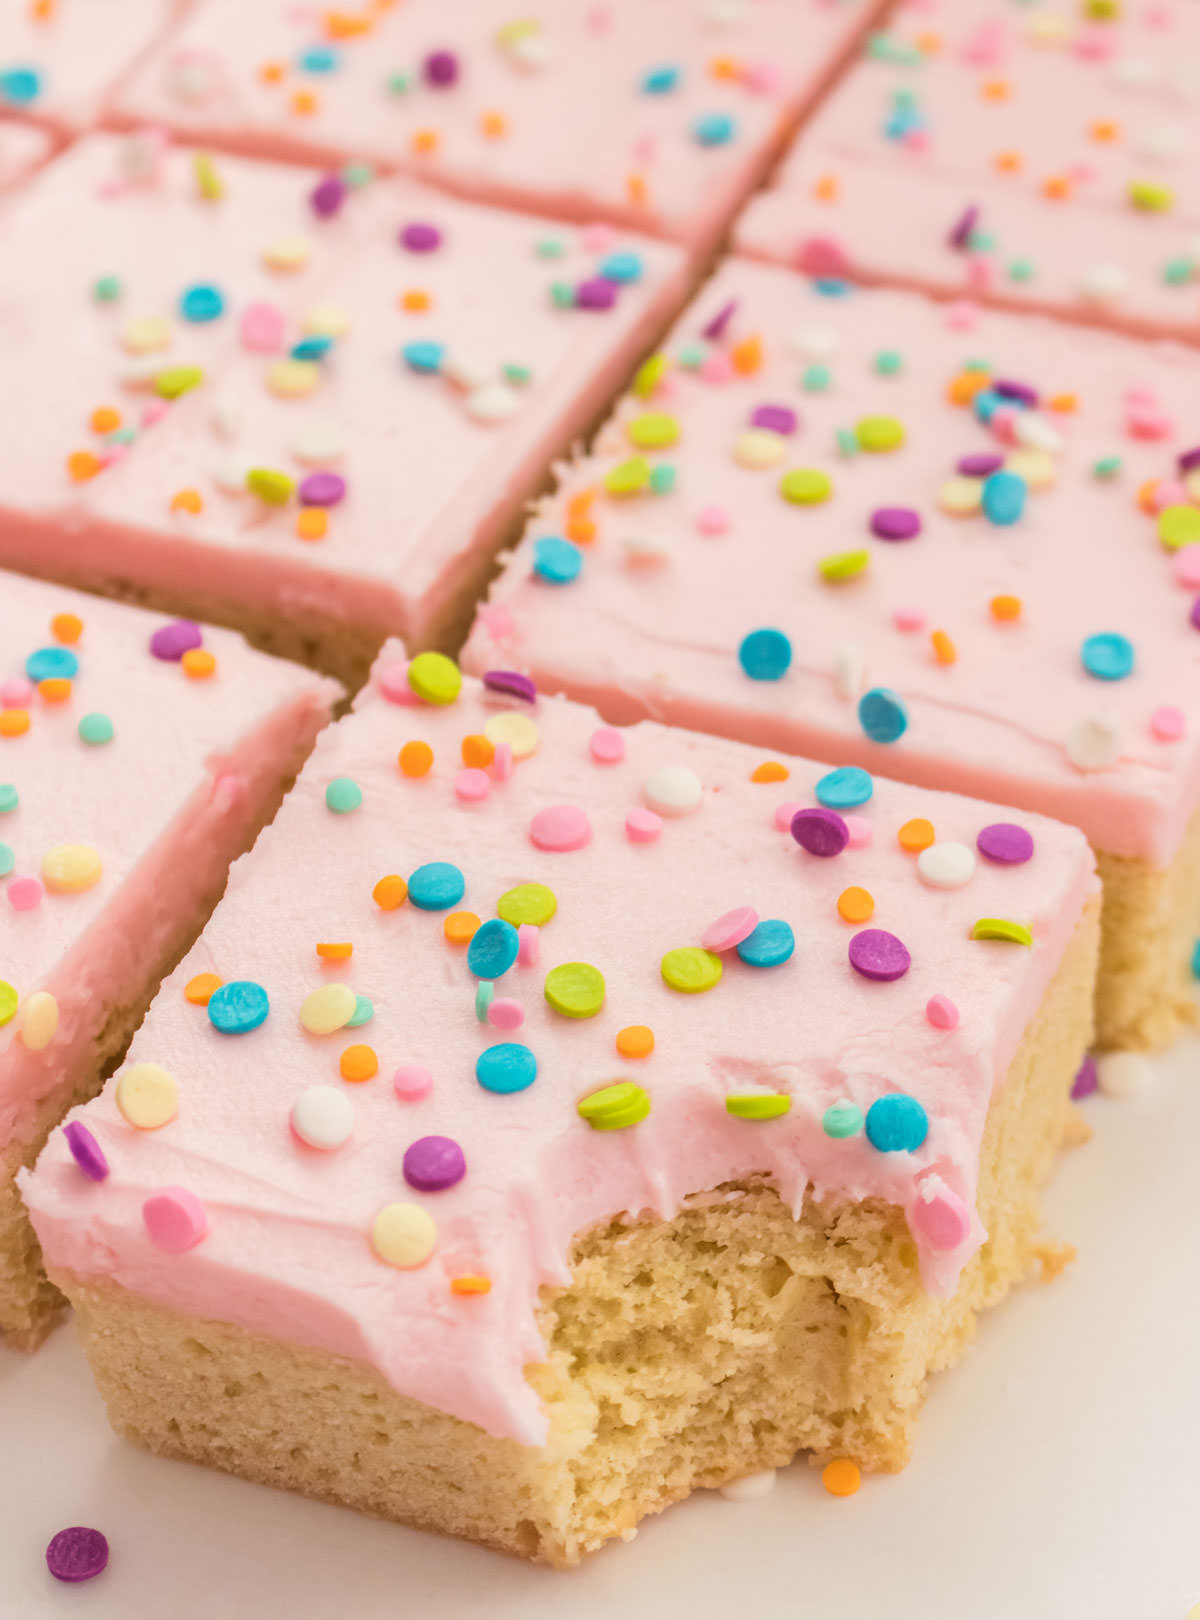 Closeup on rows of Sugar Cookie Bars covered in pink buttercream frosting and pastel sprinkles - the first one with a bite taken out of it.